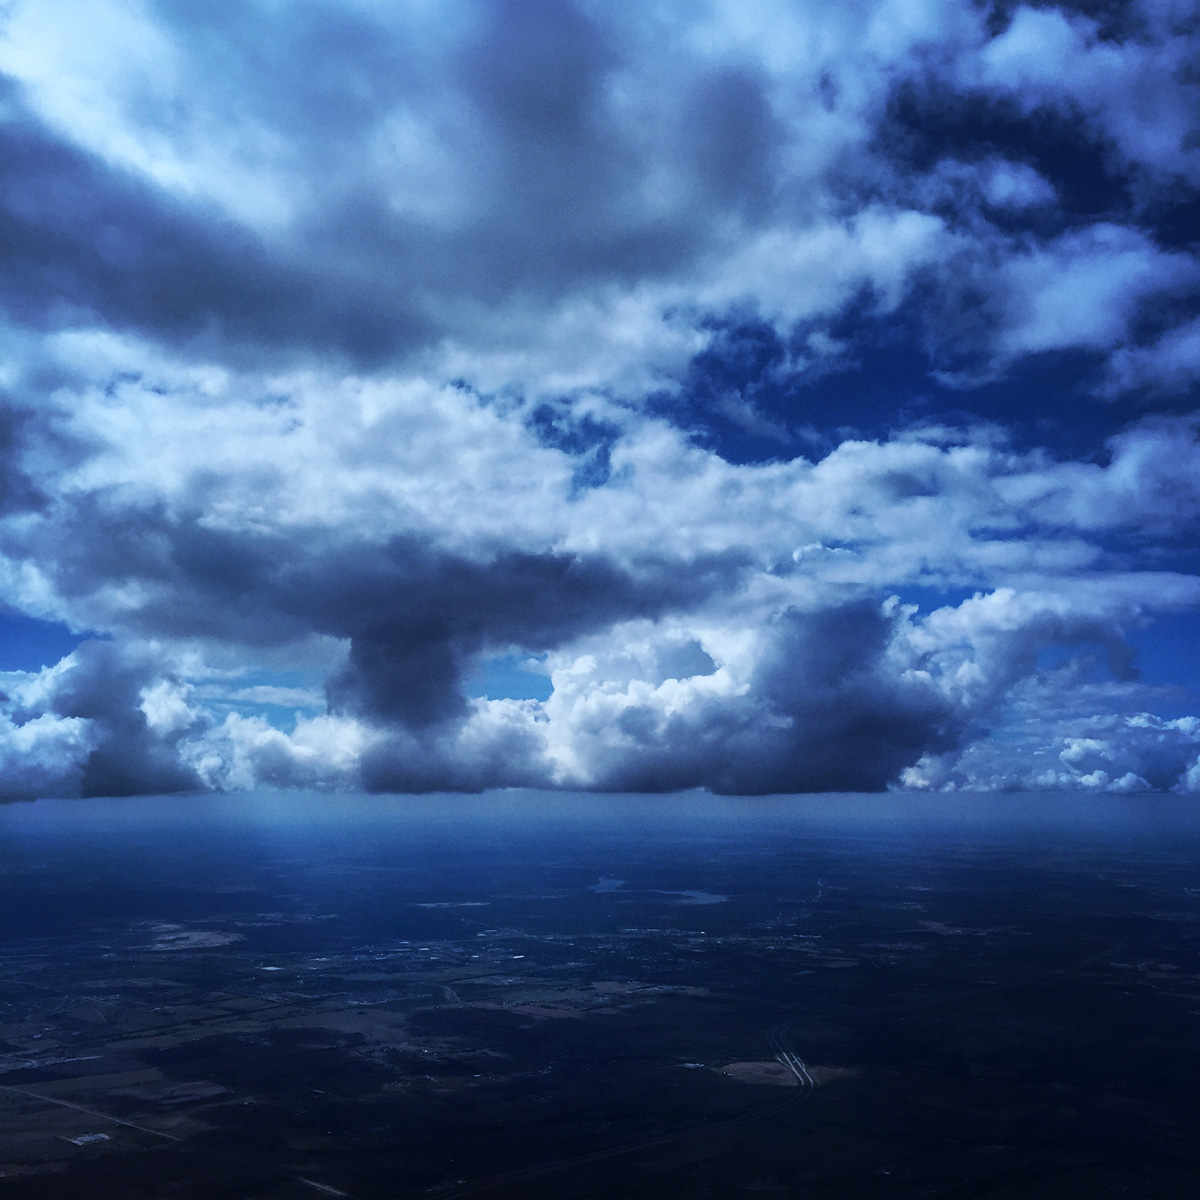 How the Clouds Got Their Names and How Goethe Popularized Them with His Science-Inspired Poems